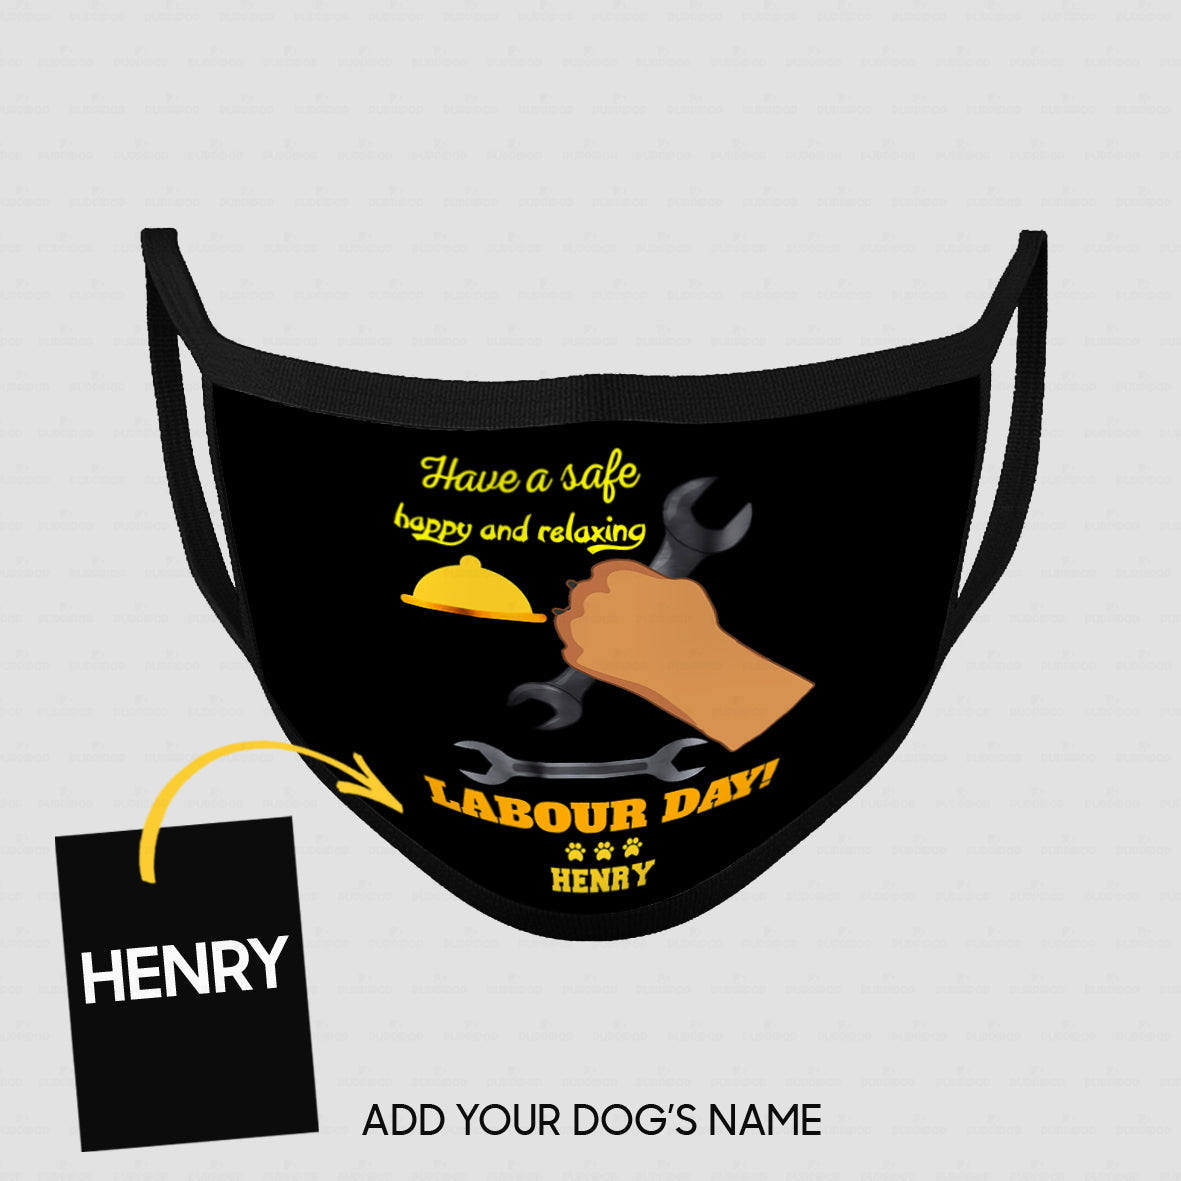 Personalized Dog Gift Idea - Have A Safe Happy And Relaxing Labour Day For Dog Lovers - Cloth Mask